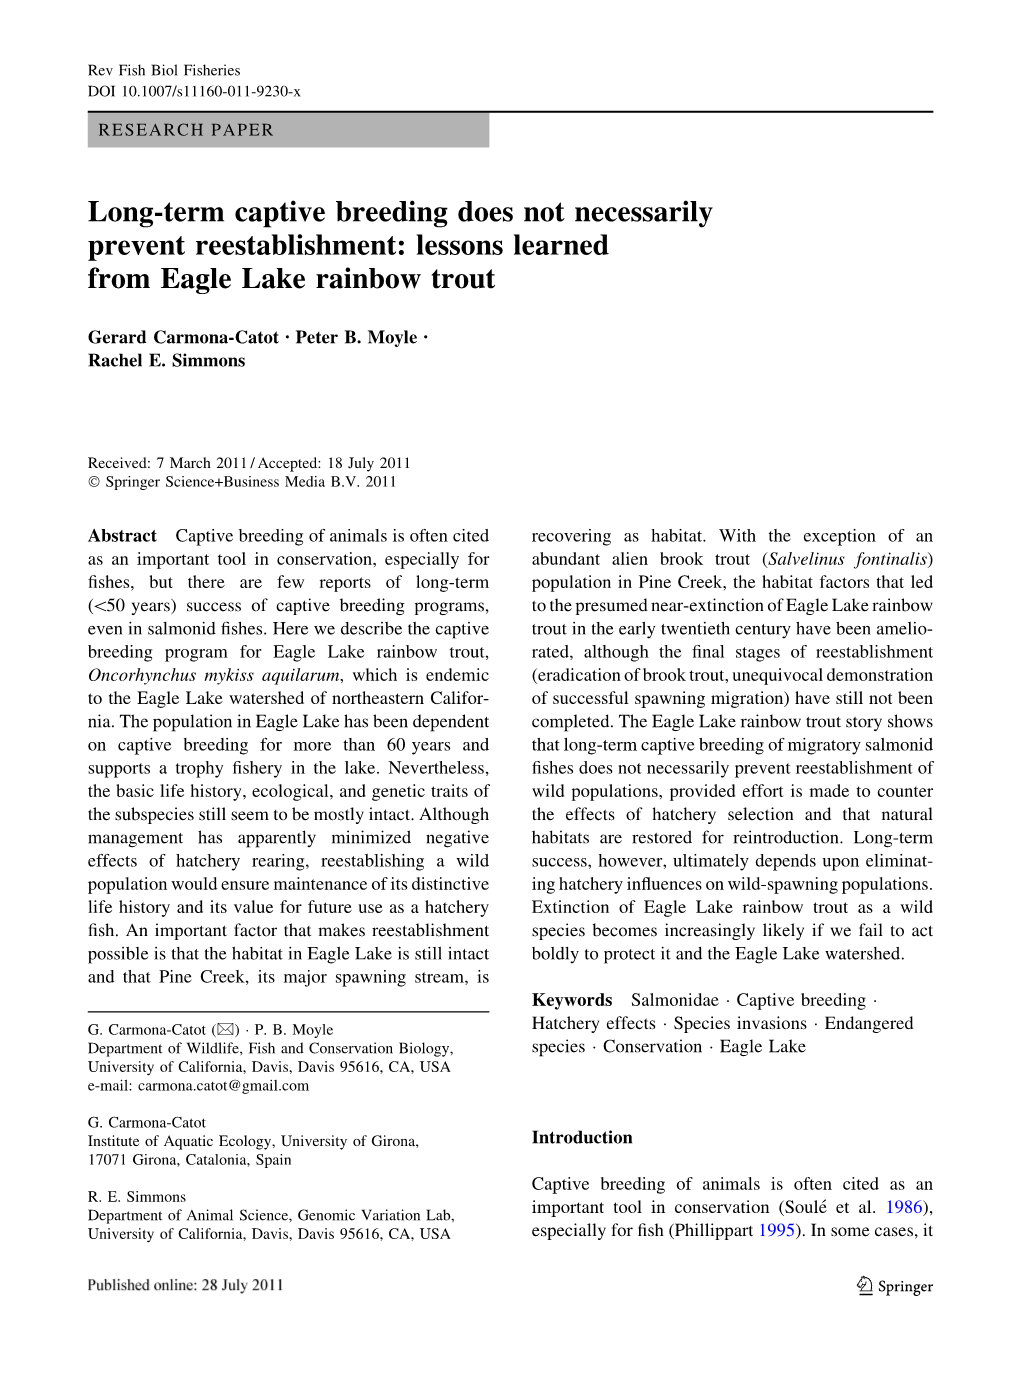 Long-Term Captive Breeding Does Not Necessarily Prevent Reestablishment: Lessons Learned from Eagle Lake Rainbow Trout